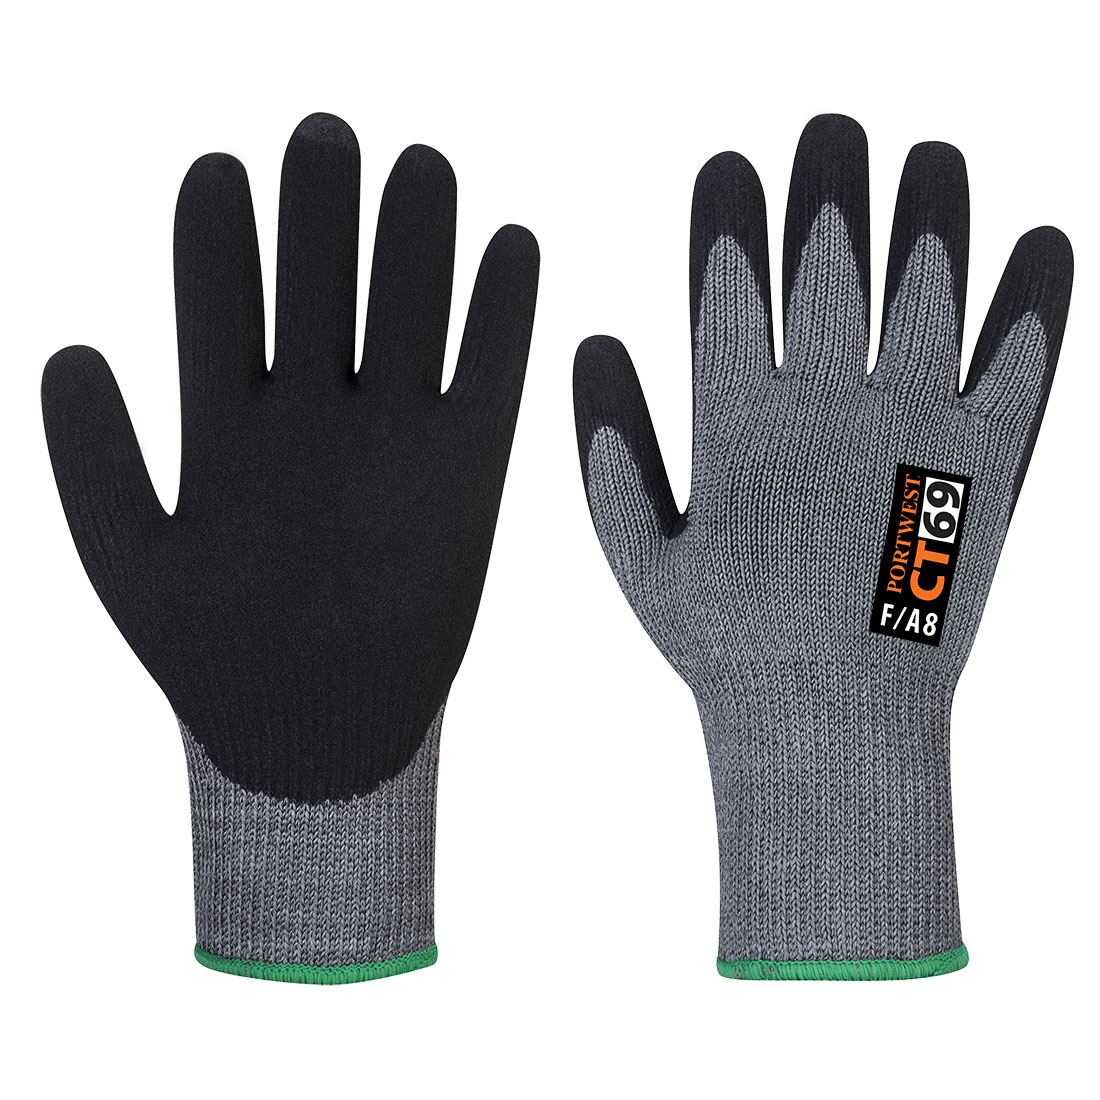 CT69  Portwest® A8 Cut Resistant Seamless Knit Nitrile Foam Coated Work Gloves